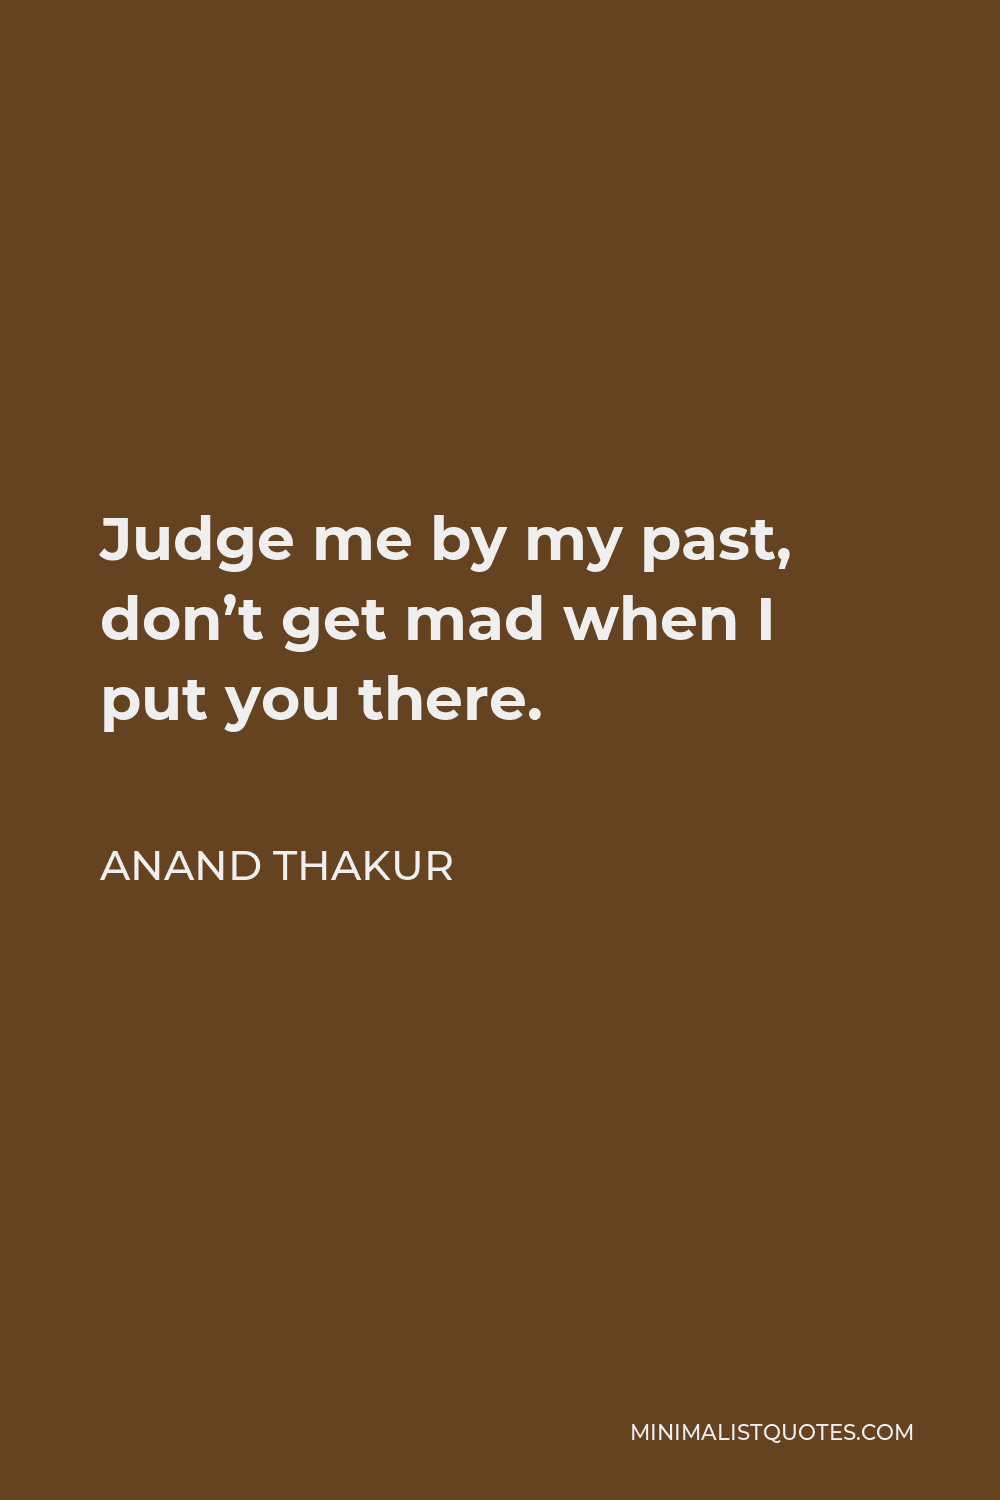 Anand Thakur Quote - Judge me by my past, don’t get mad when I put you there.